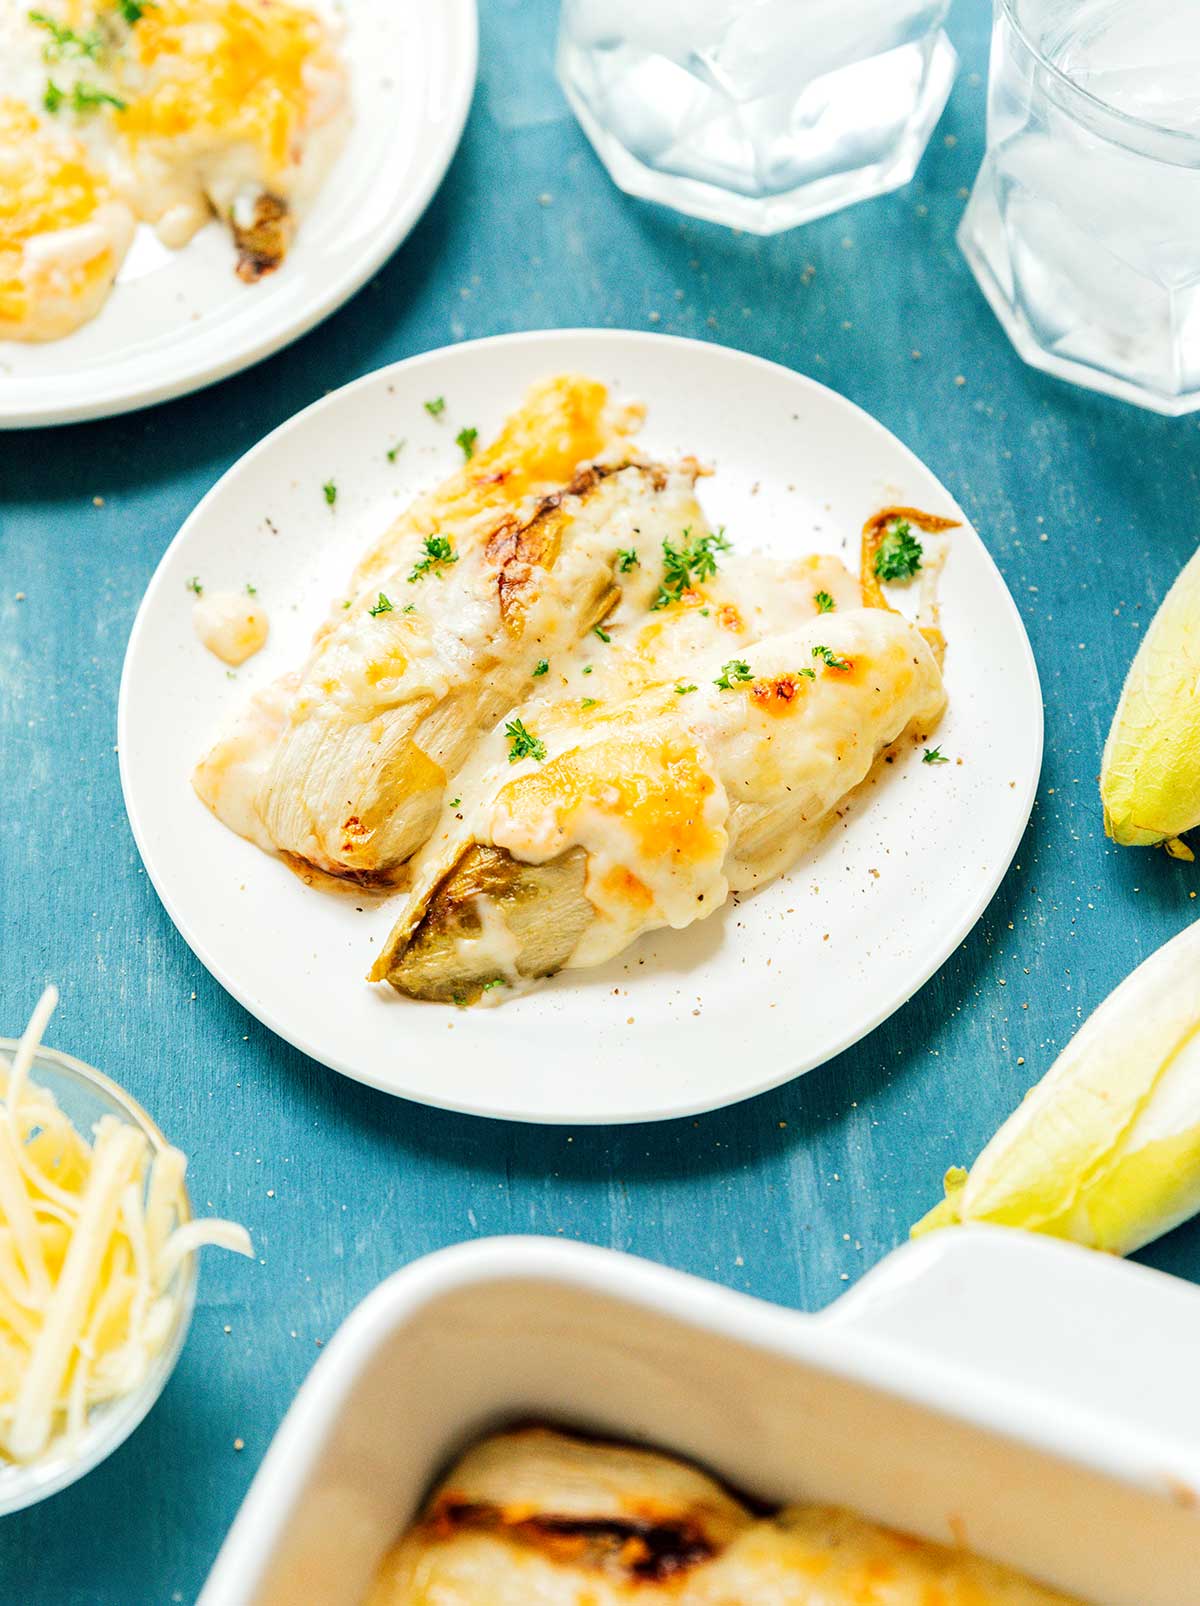 Two servings of Belgian endive gratin on a white plate